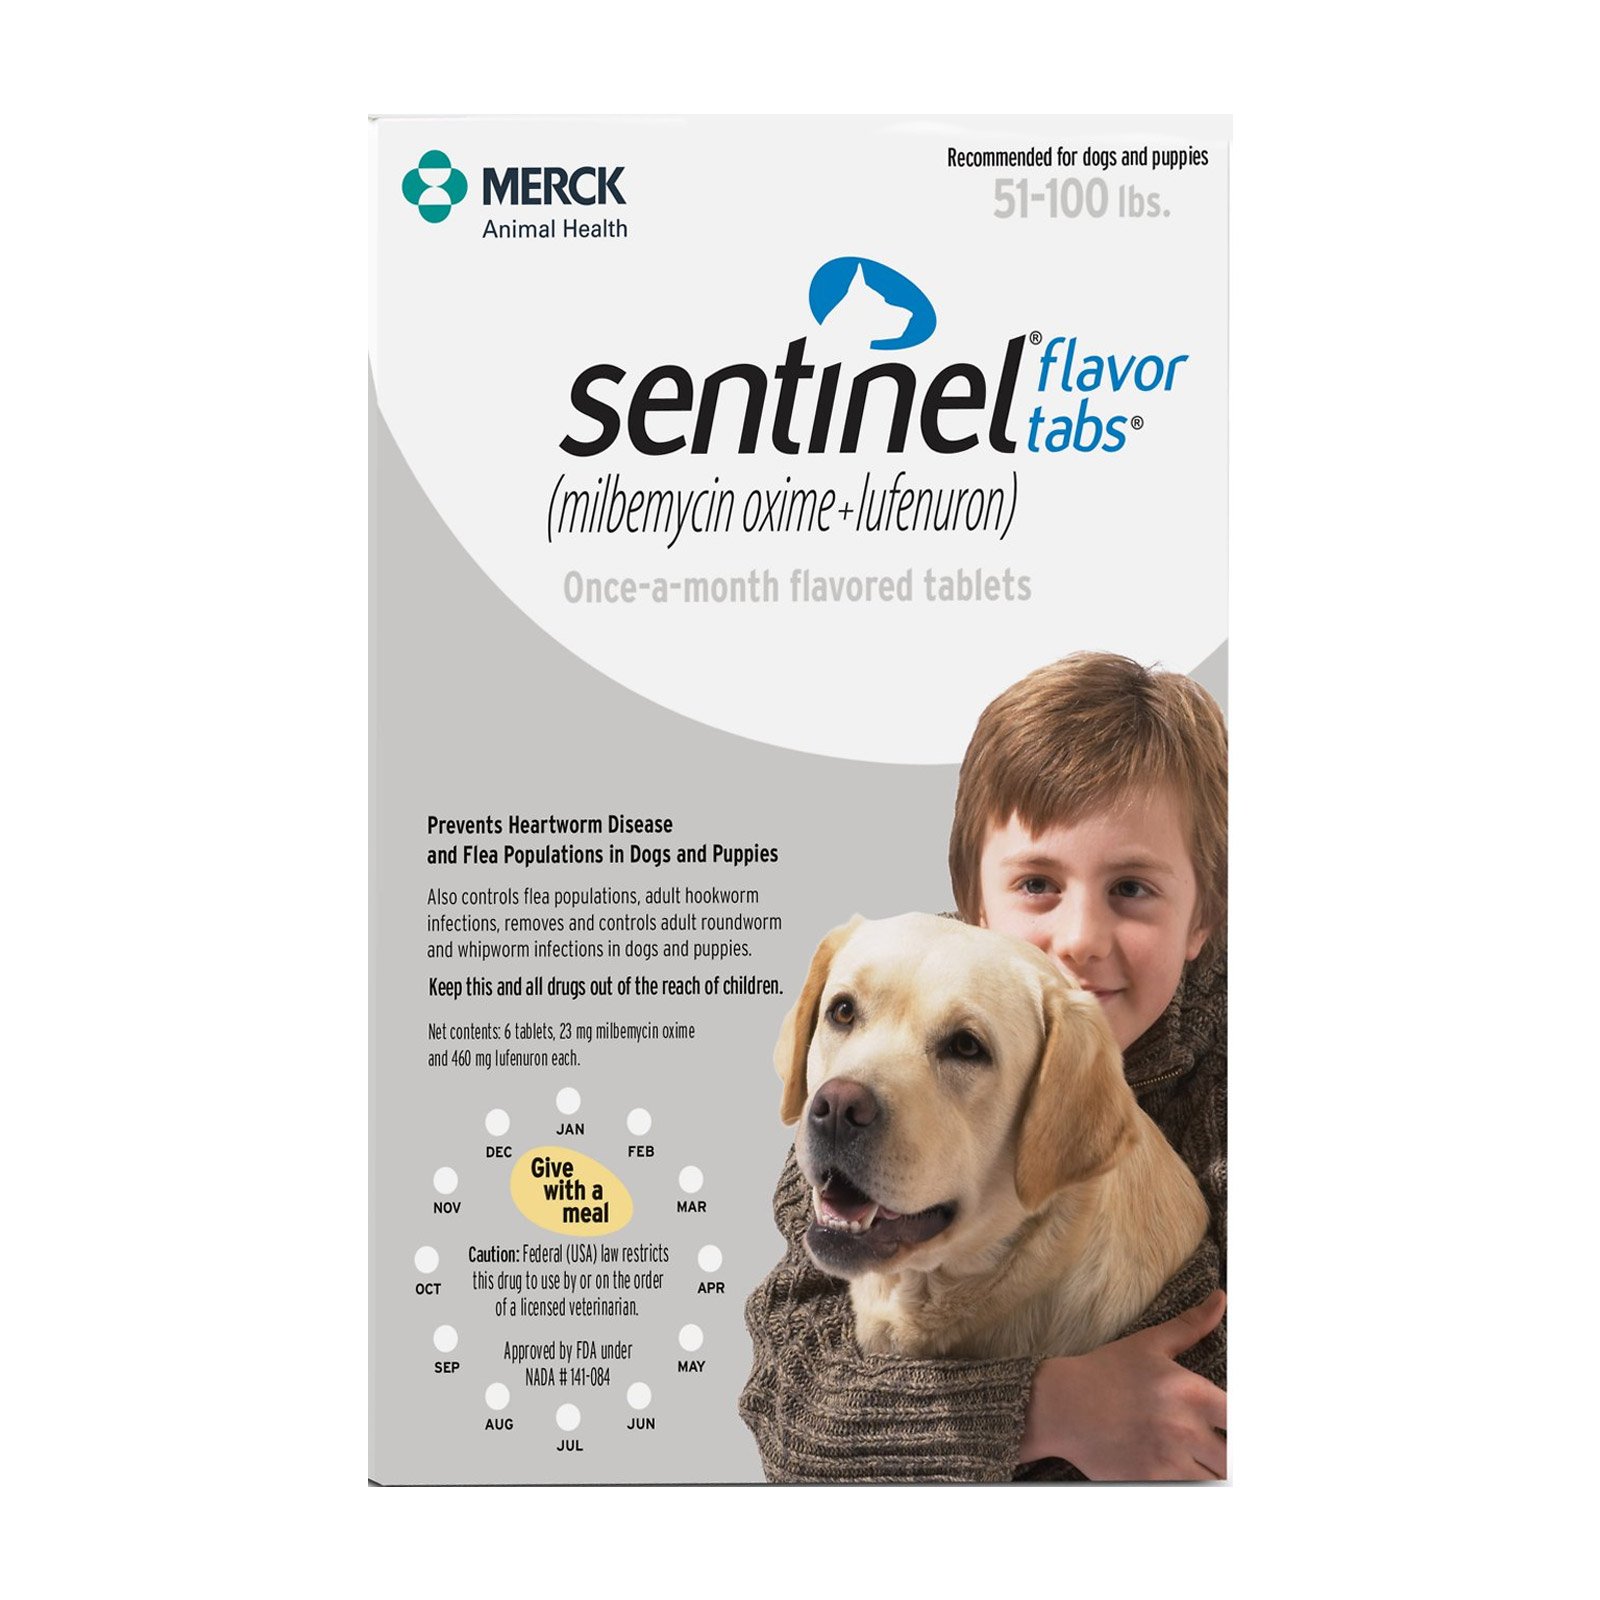 sentinel-for-dogs-51-100-lbs-white.jpg